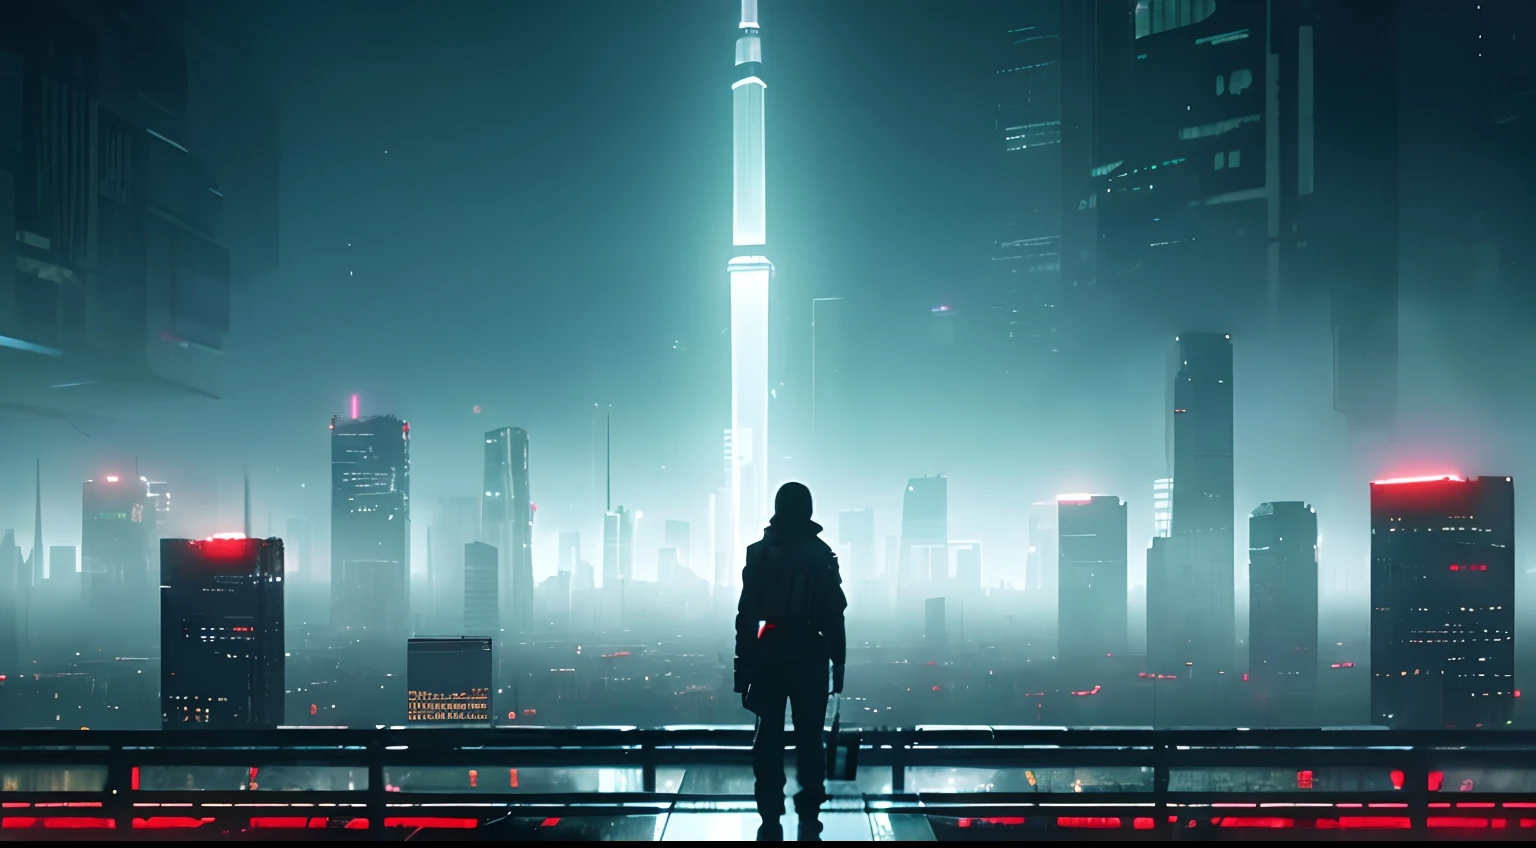 a dark, dystopian reflection of society, (best quality, highres), with a mix of eerie and realistic imagery, (horror:1.2) (sci-fi:1.1), contrasting colors with a desaturated and monochromatic tone, (moody lighting:1.2), featuring a futuristic cityscape with towering skyscrapers, (grim atmosphere), ethereal holographic displays, (neon lights:1.1), and a sense of isolation and unease, (loneliness:1.2).